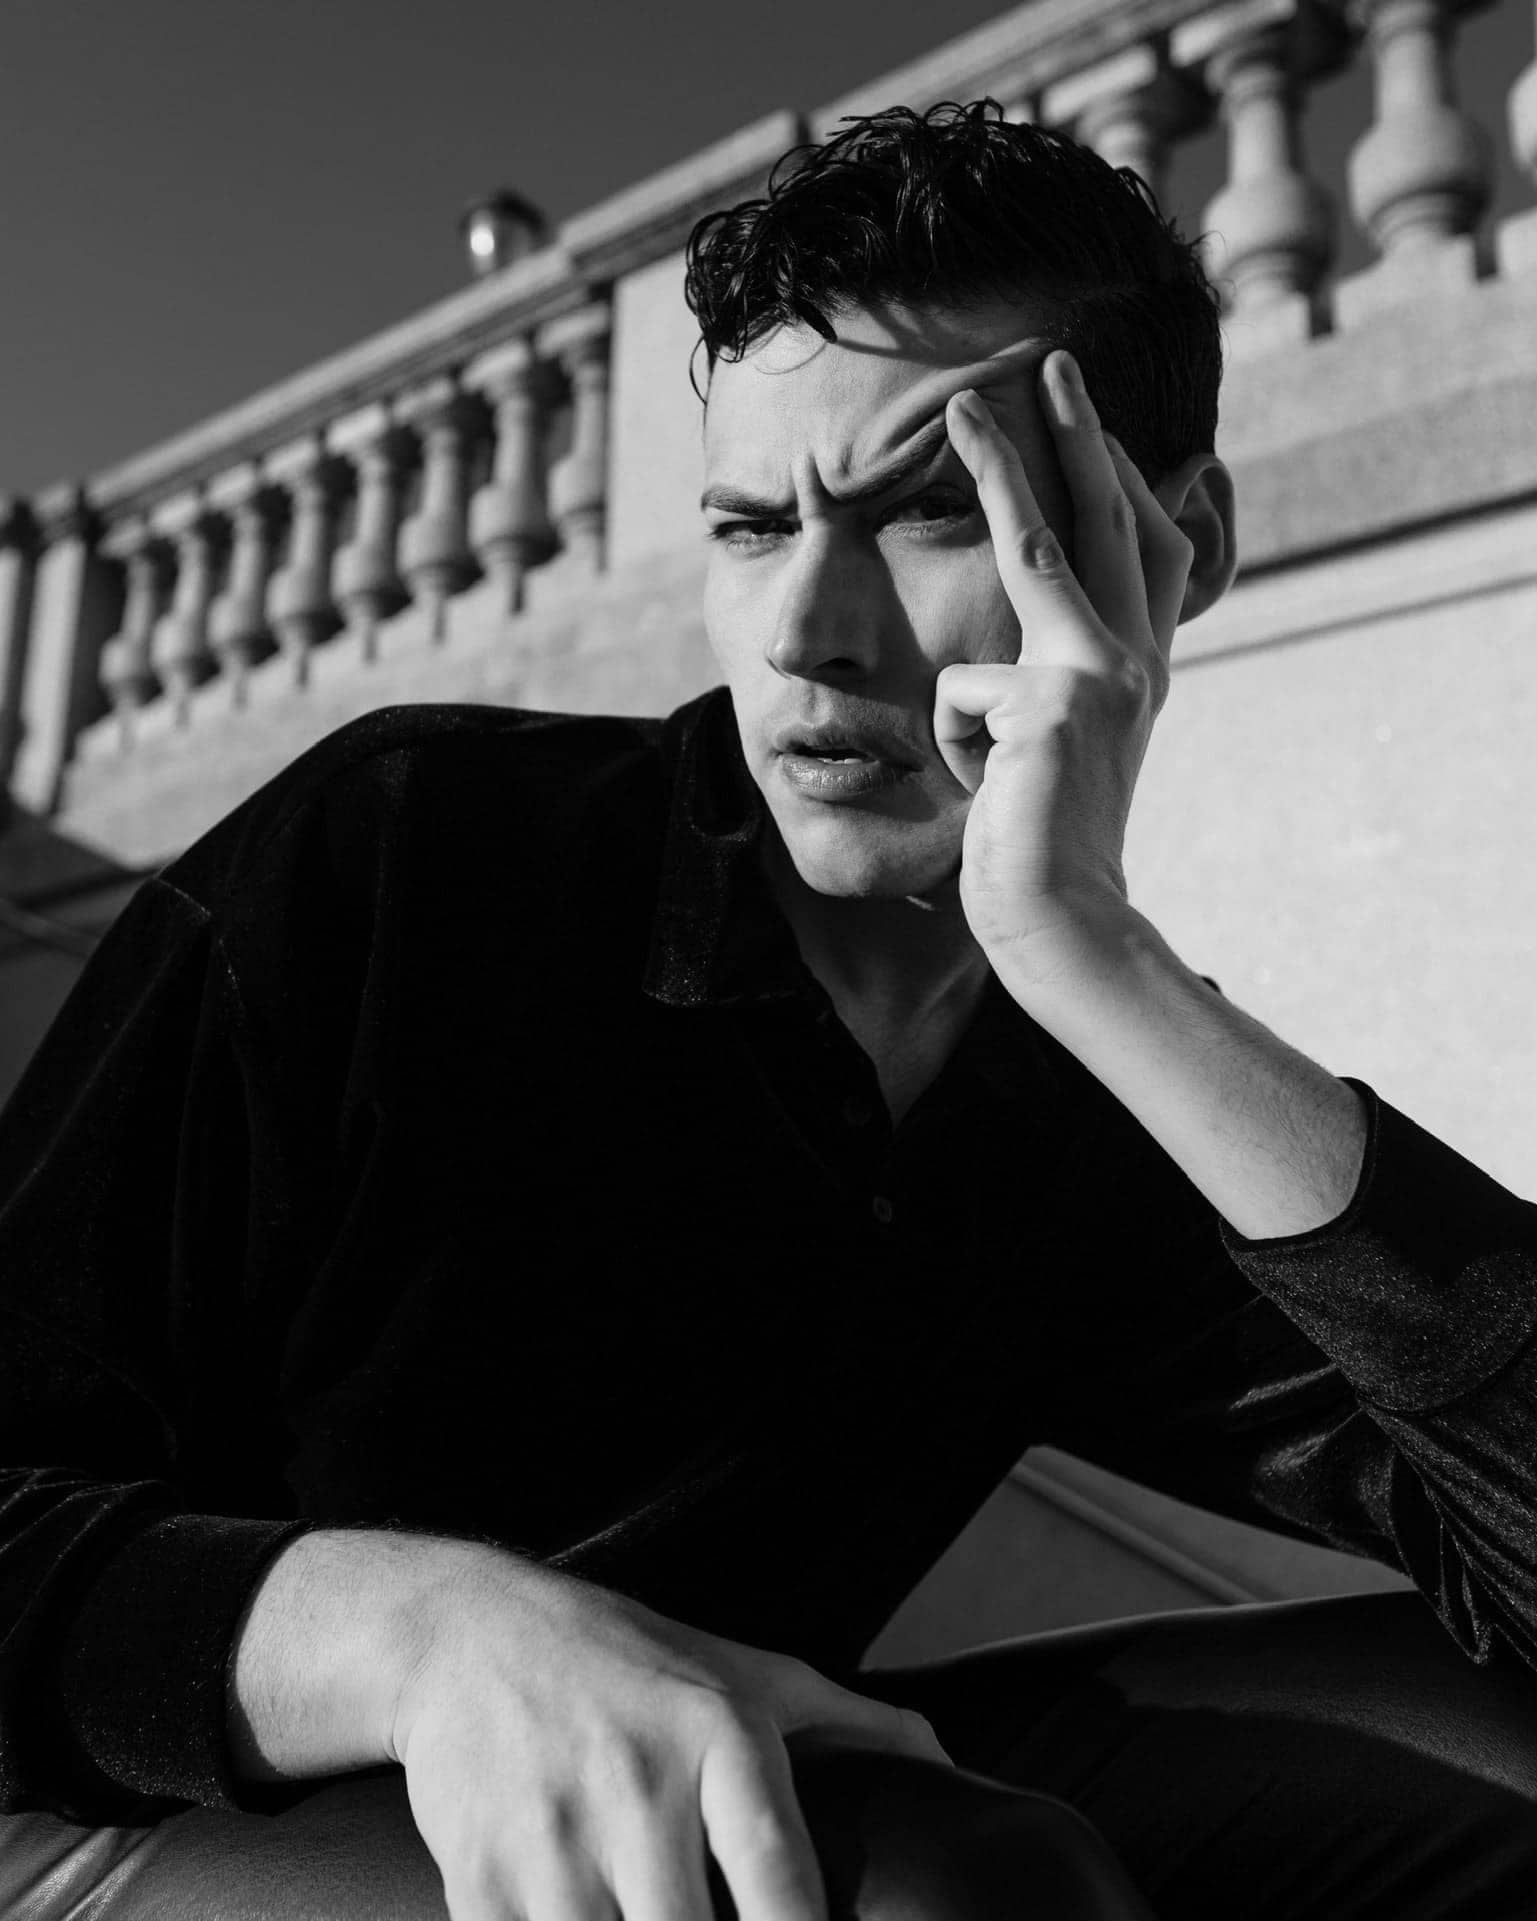 Professional black and white IMDB profile picture of rising star Actor Troy Bronson, striking a unique pose with his left hand on his face, wearing a long-sleeve black shirt and leather pants.